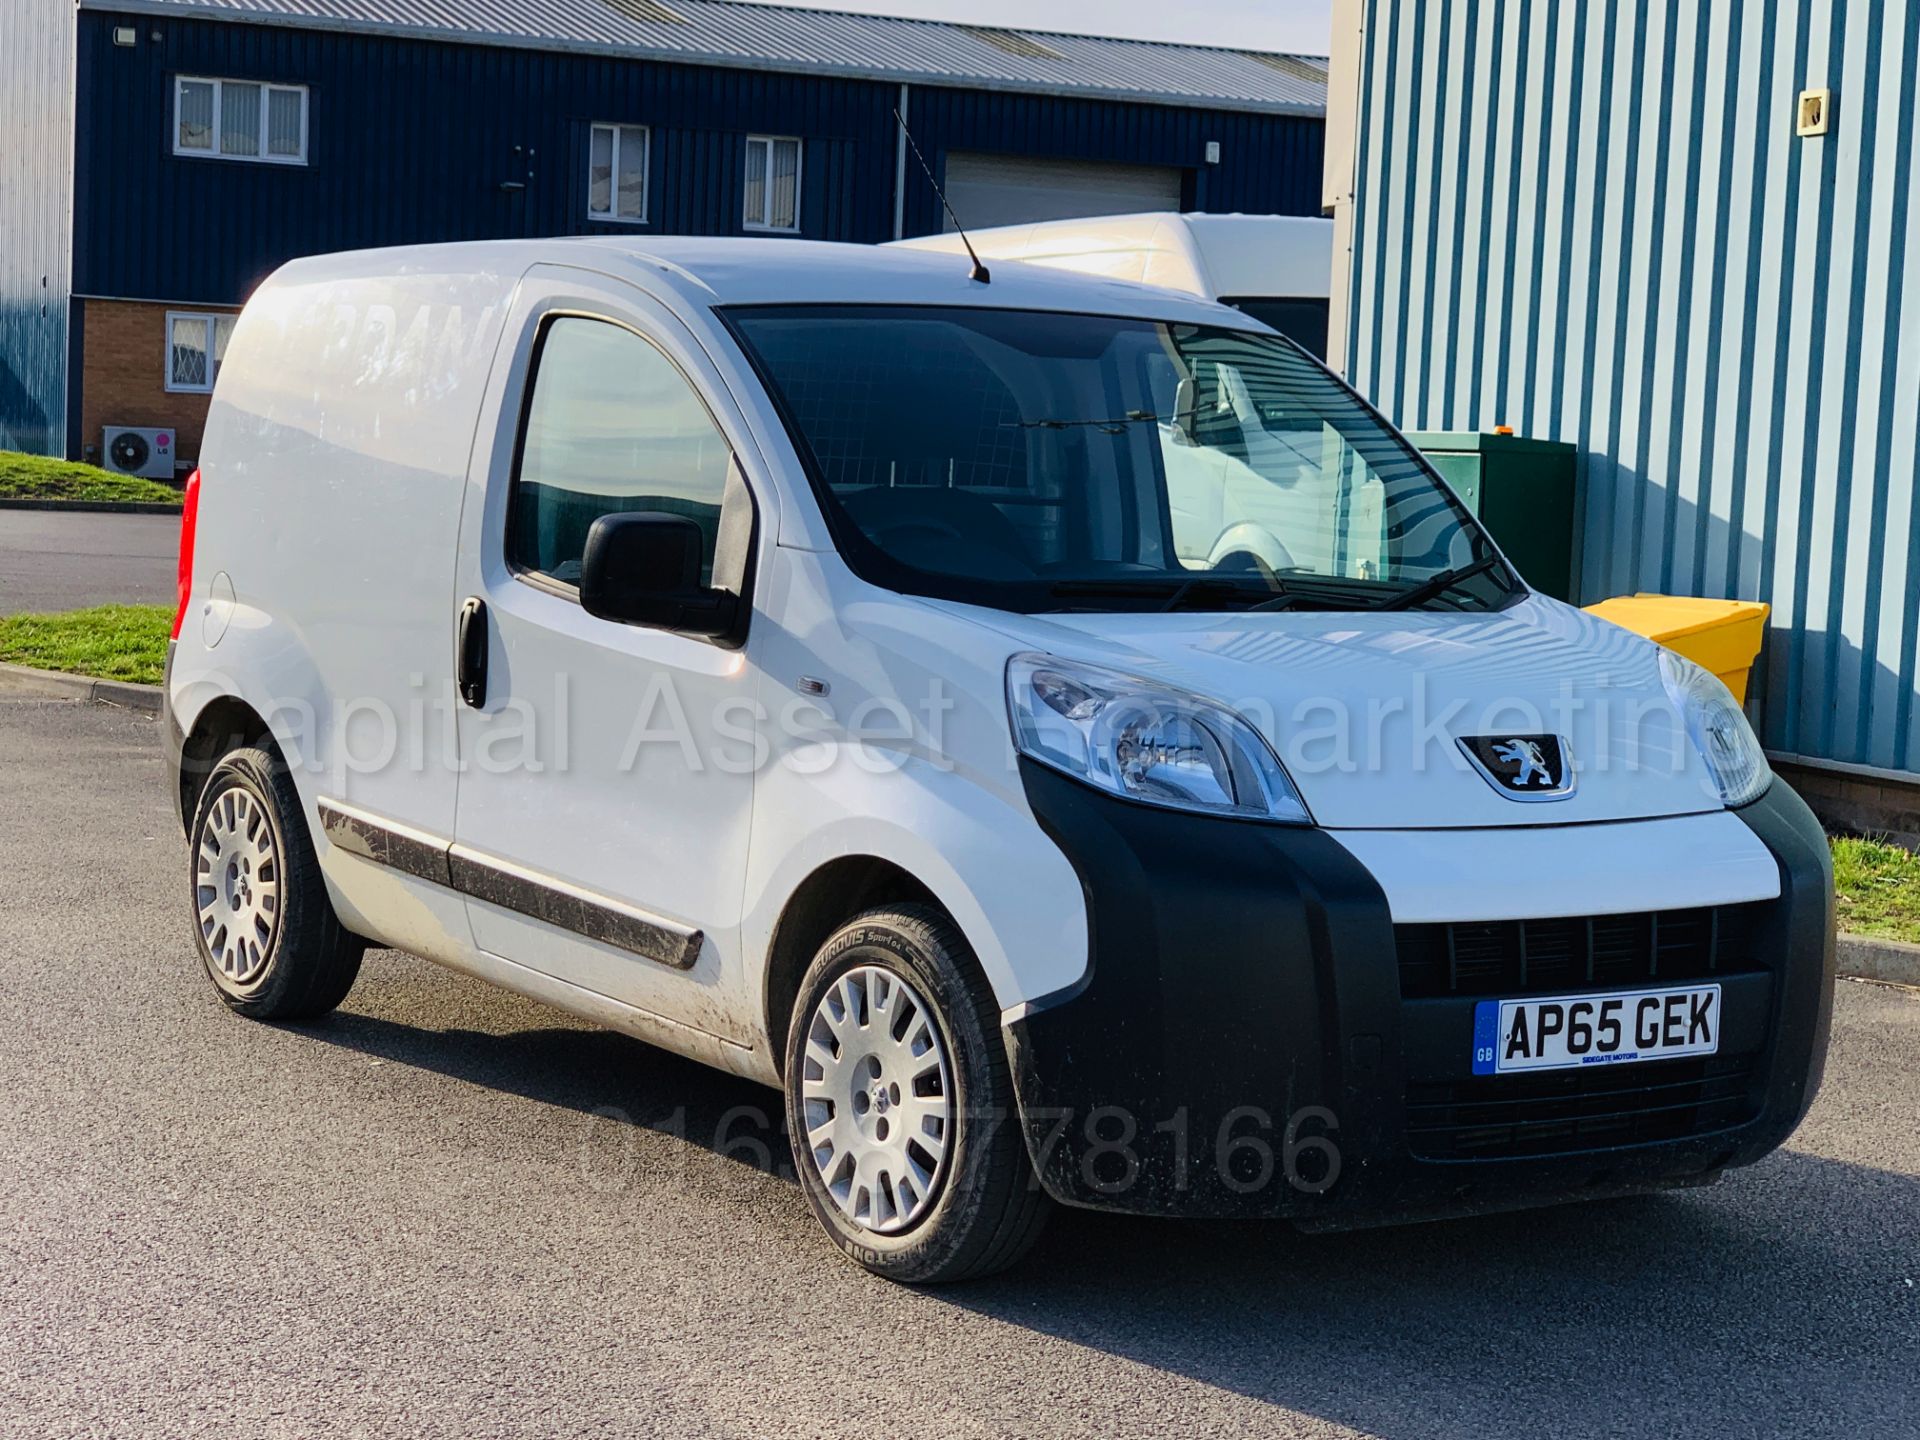 (On Sale) PEUGEOT BIPPER *PROFESSIONAL* LCV - PANEL VAN (65 REG) 'HDI - 5 SPEED' (1 OWNER) *AIR CON* - Image 2 of 36